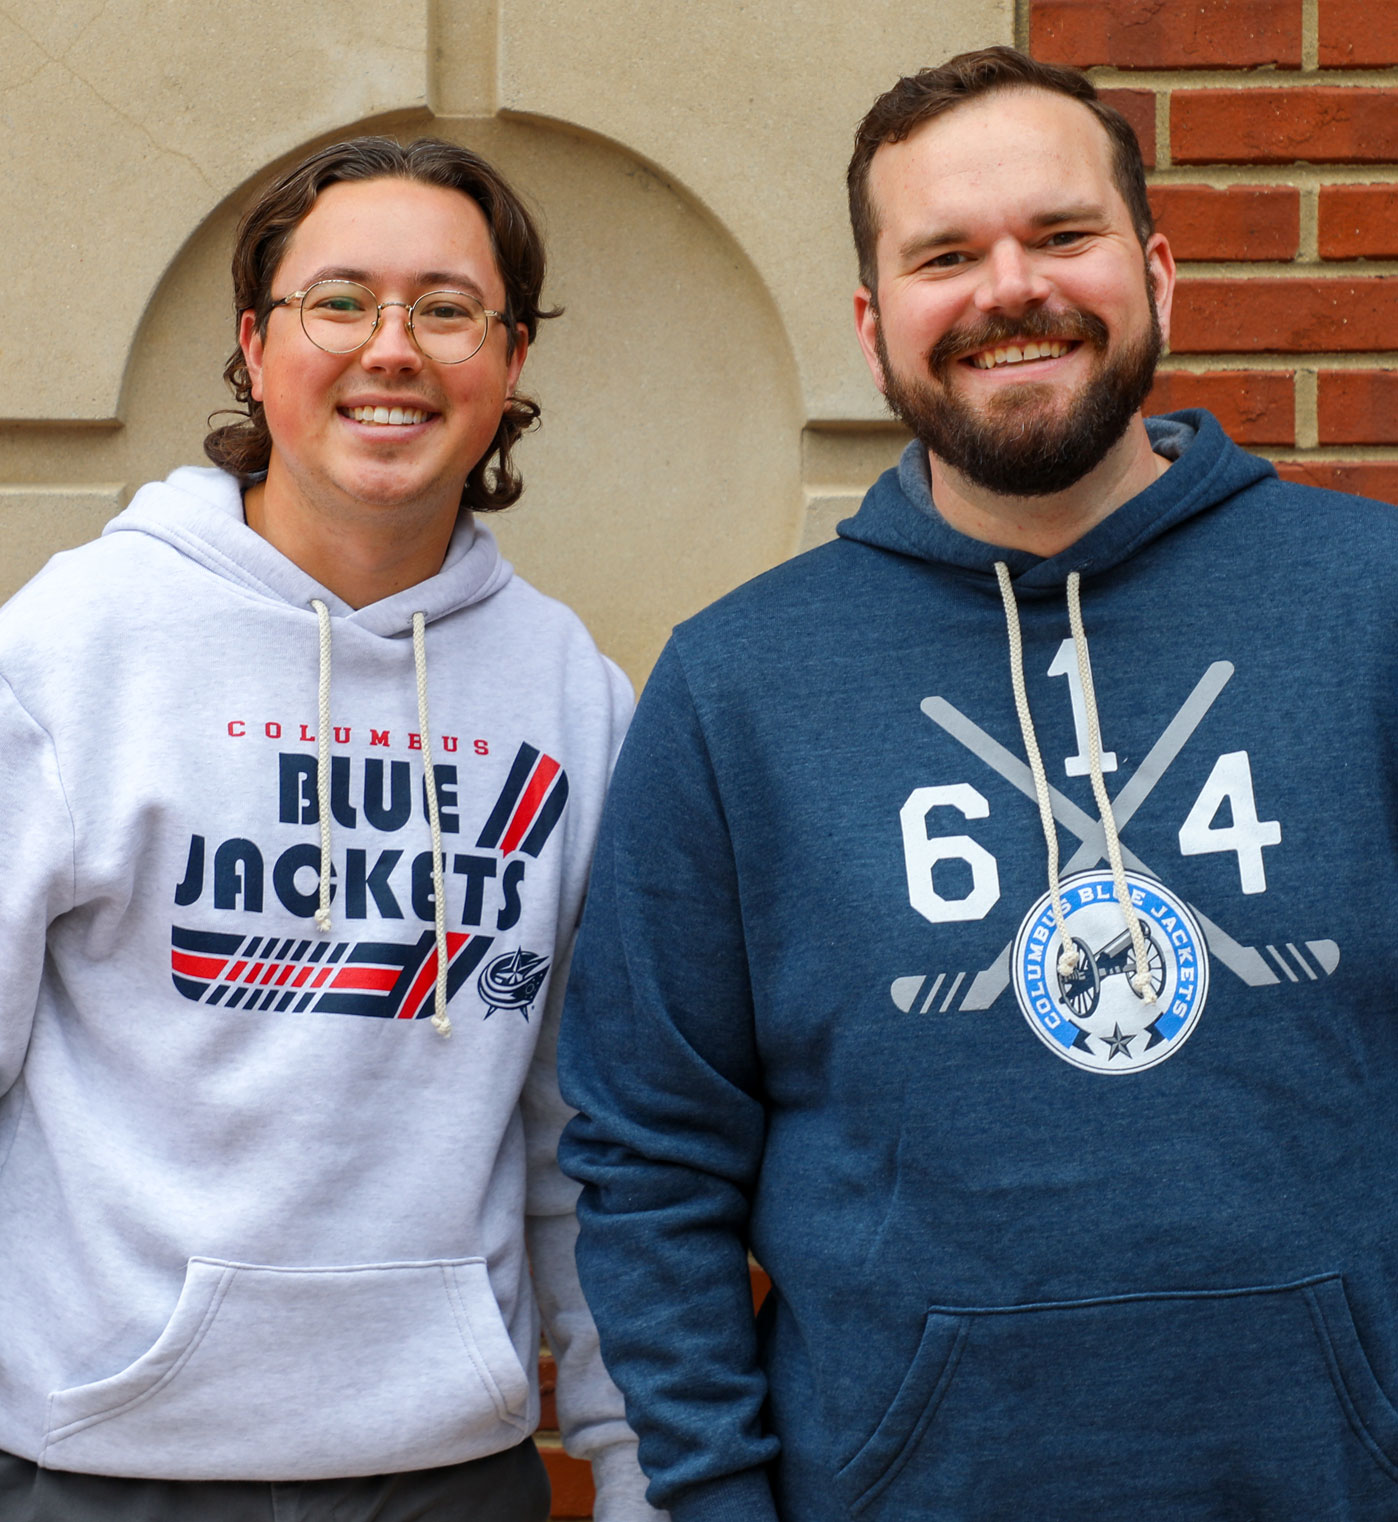 Two friends featured wearing Columbus Blue Jacket gear at store